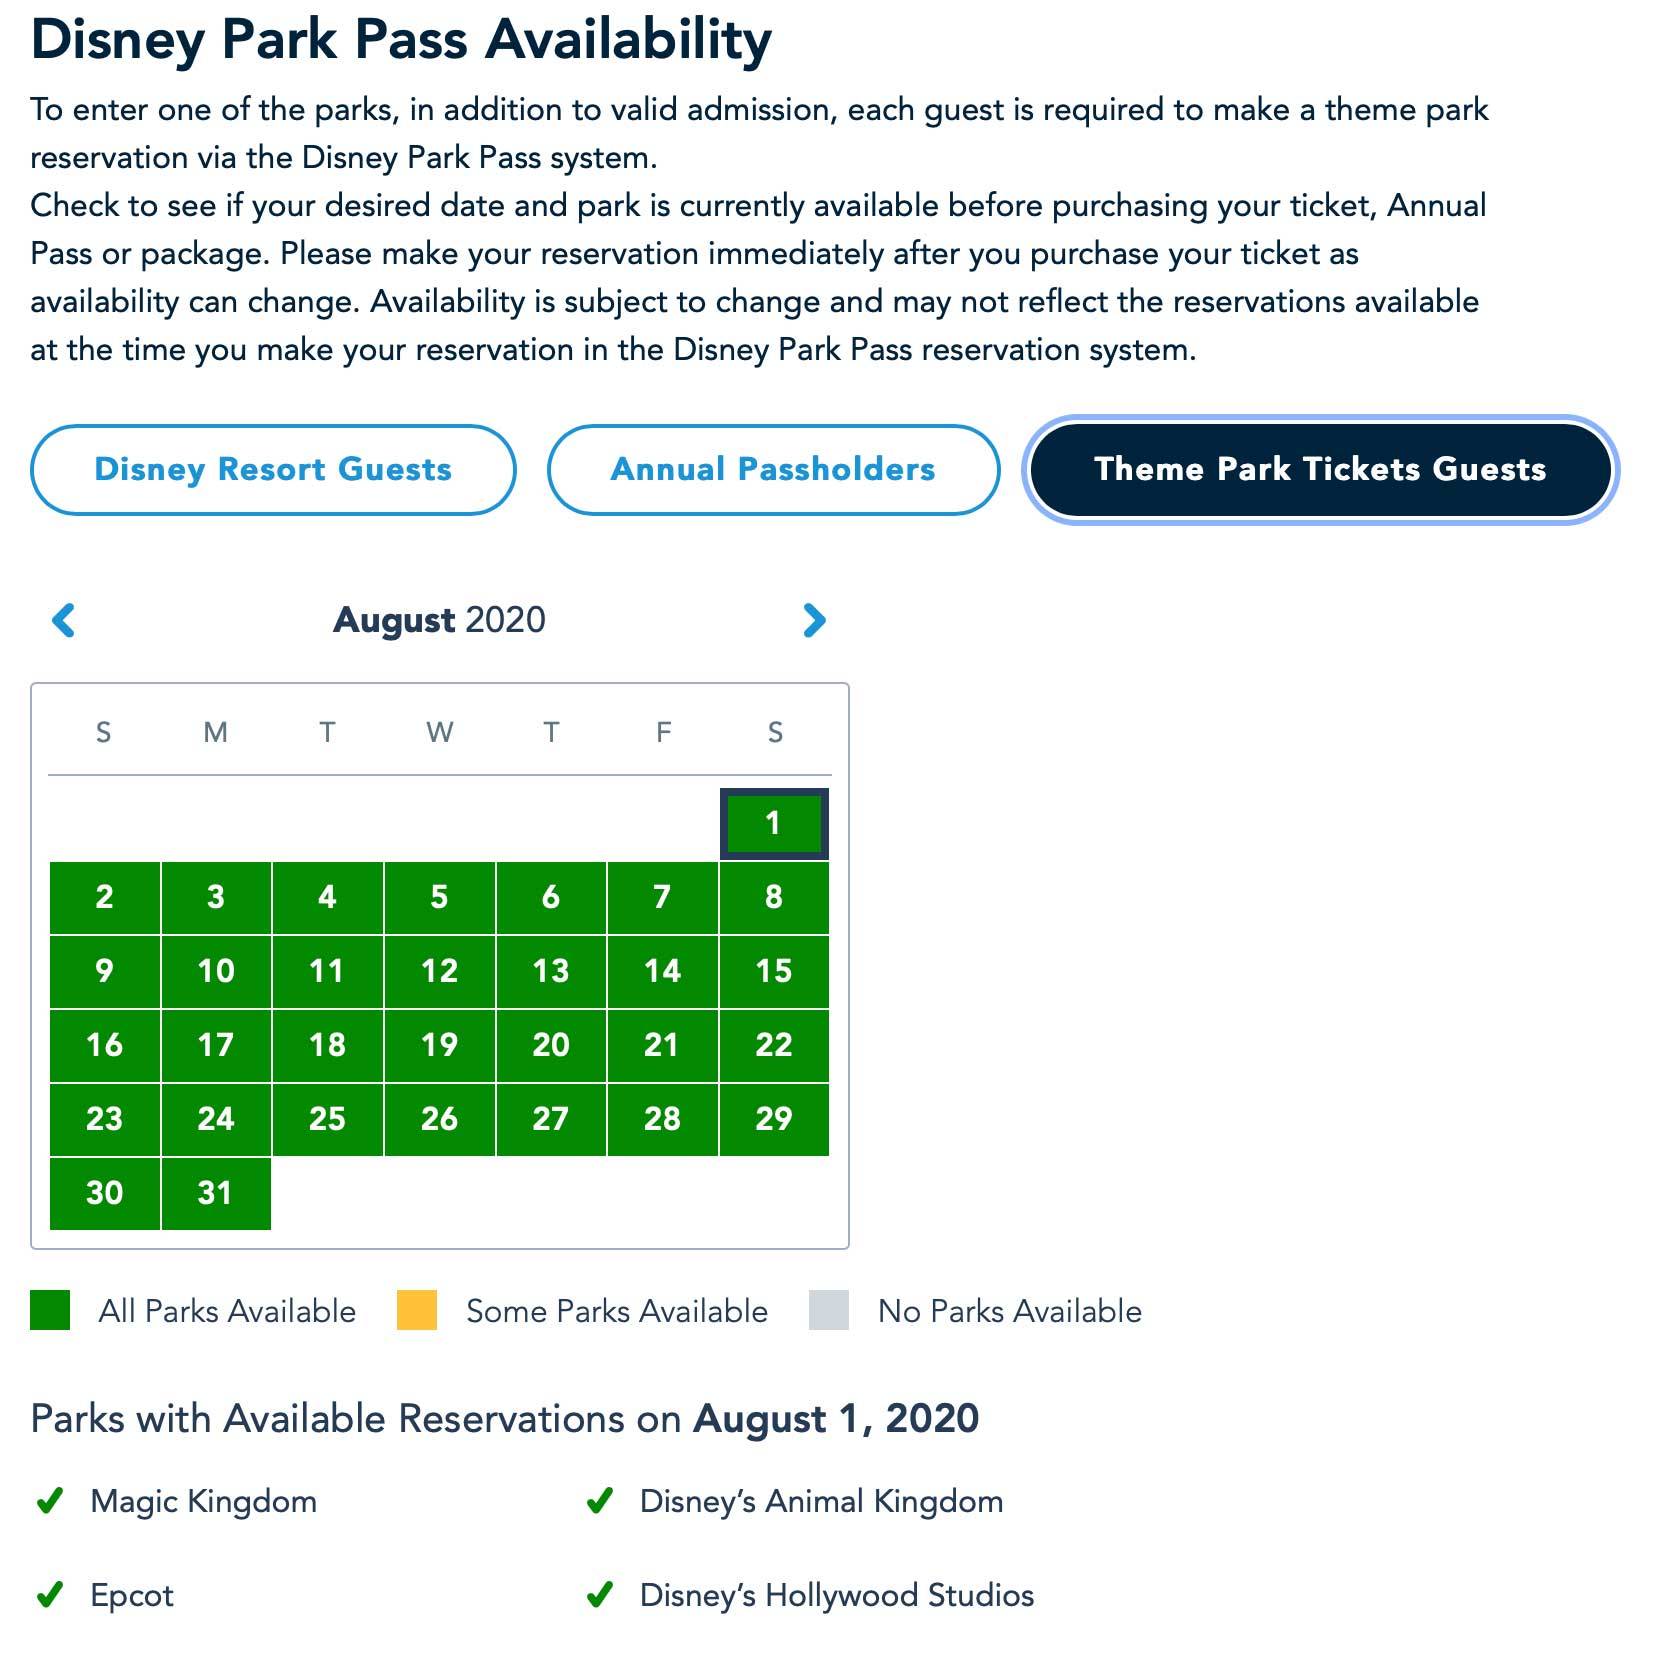 Disney Parks Pass availability for Theme Park Tickets guests